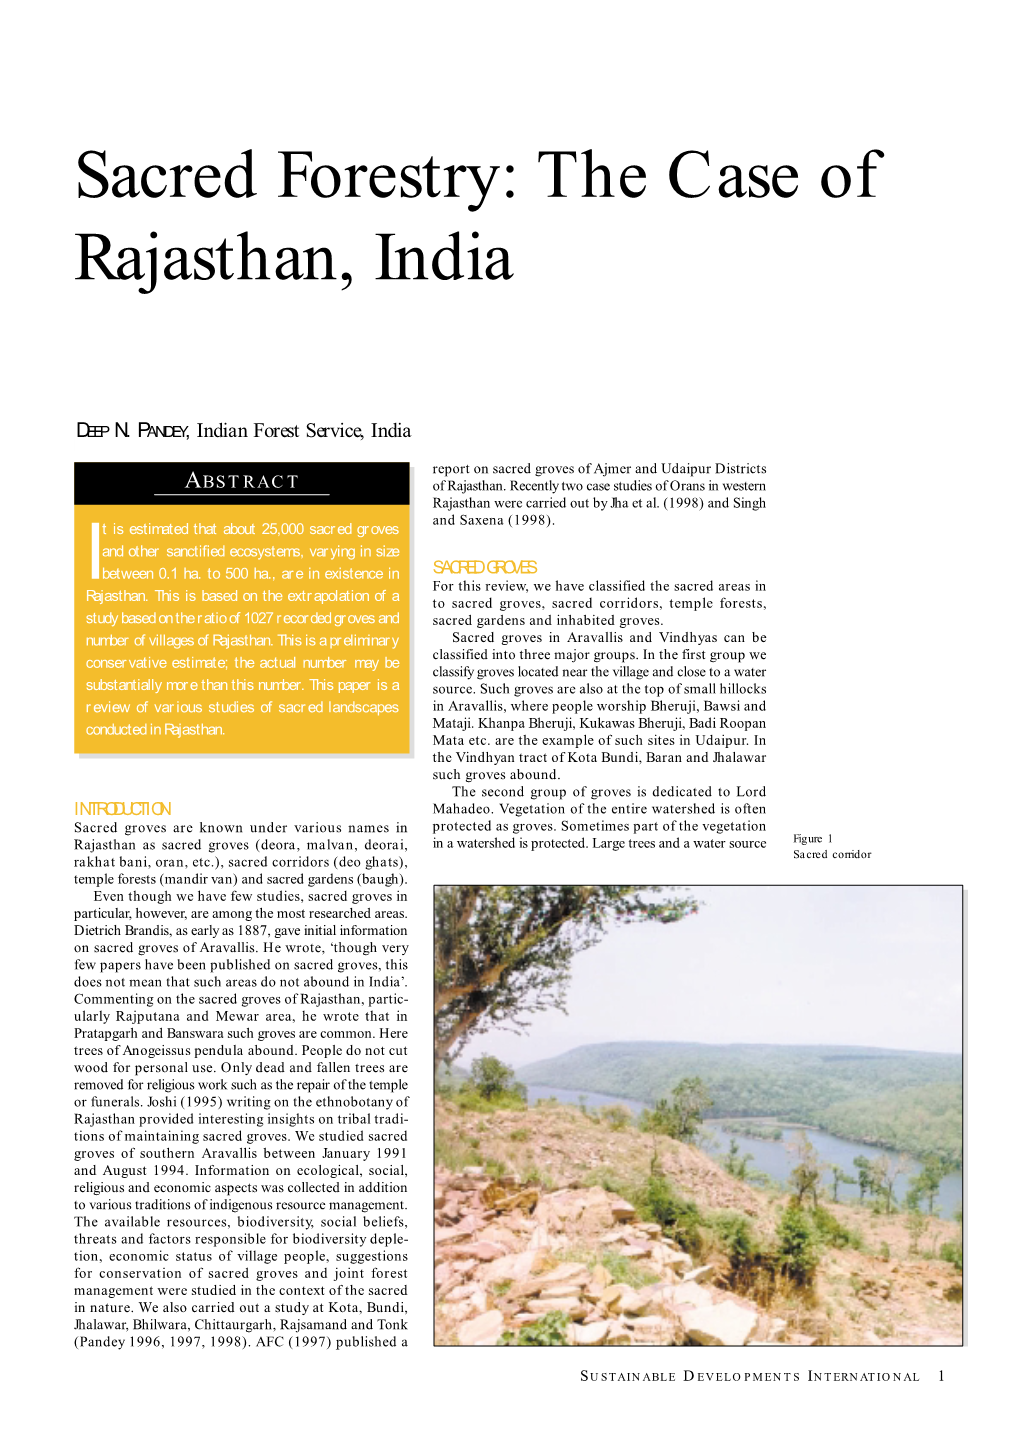 Sacred Groves of Rajasthan, Partic- Ularly Rajputana and Mewar Area, He Wrote That in Pratapgarh and Banswara Such Groves Are Common